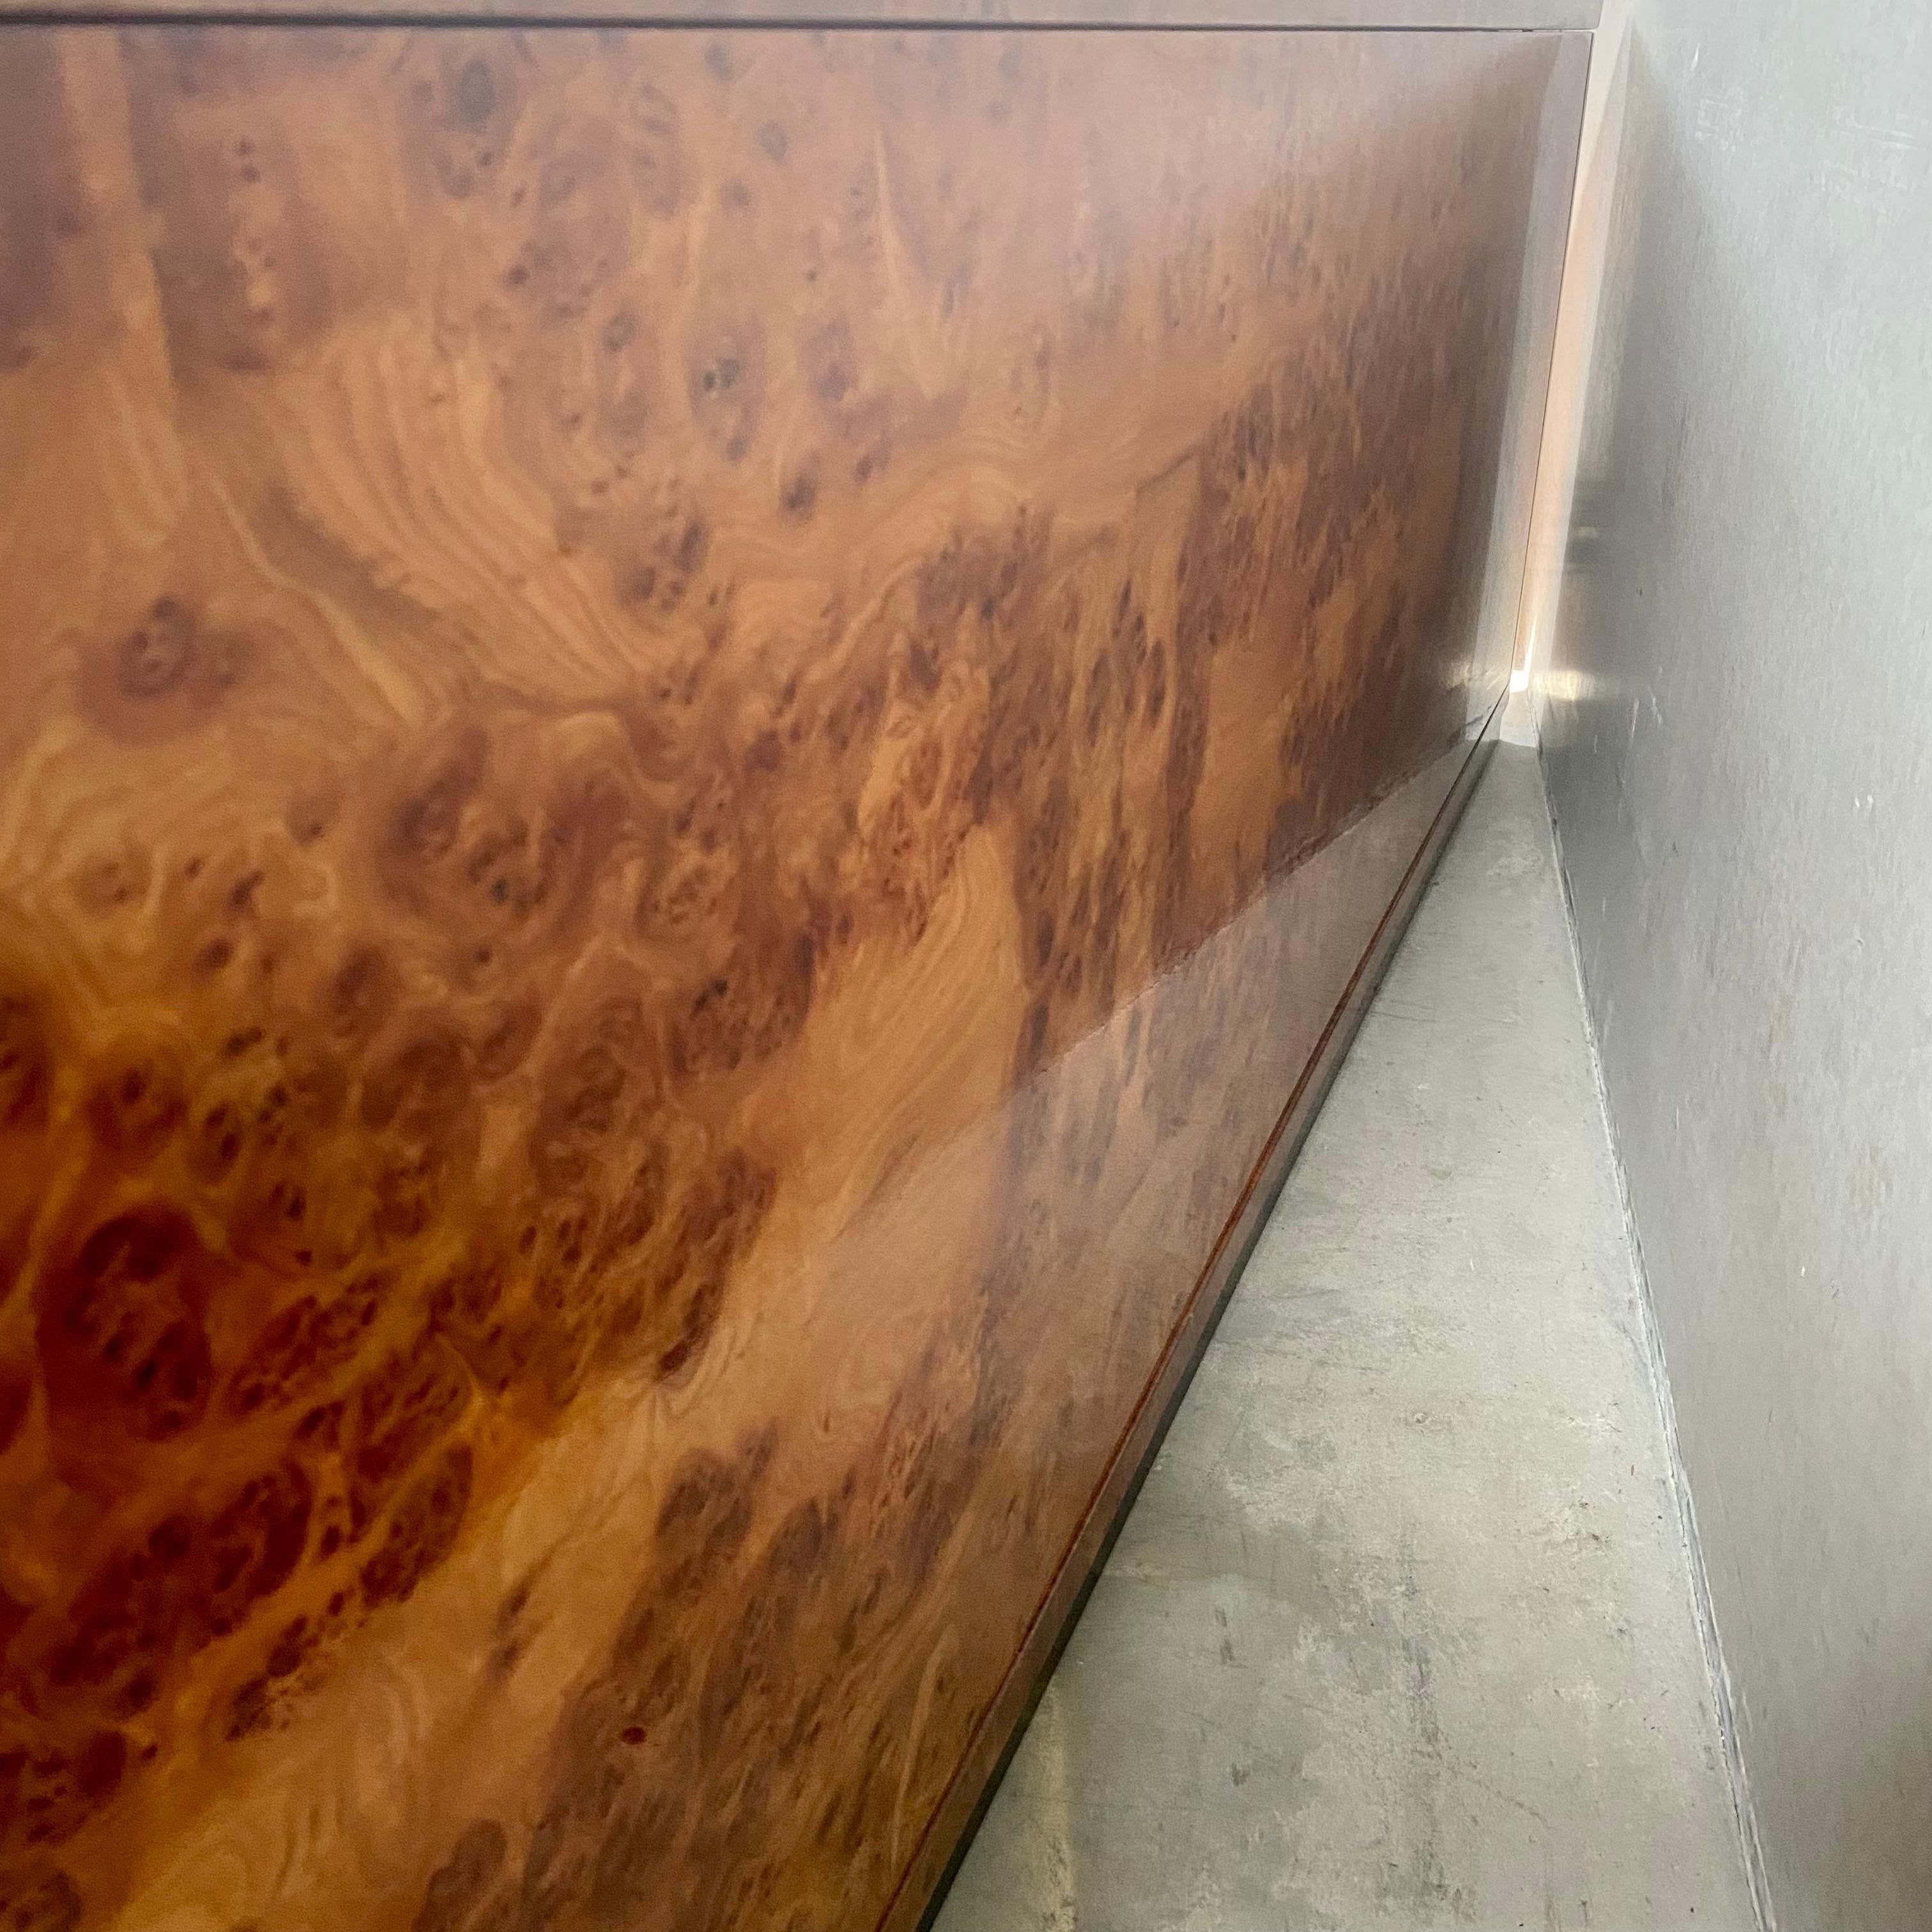 Briar Burl Wood Sideboard by Guerini Emilio for Gdm 24 Kt Gold Plated Italy 1980 For Sale 2